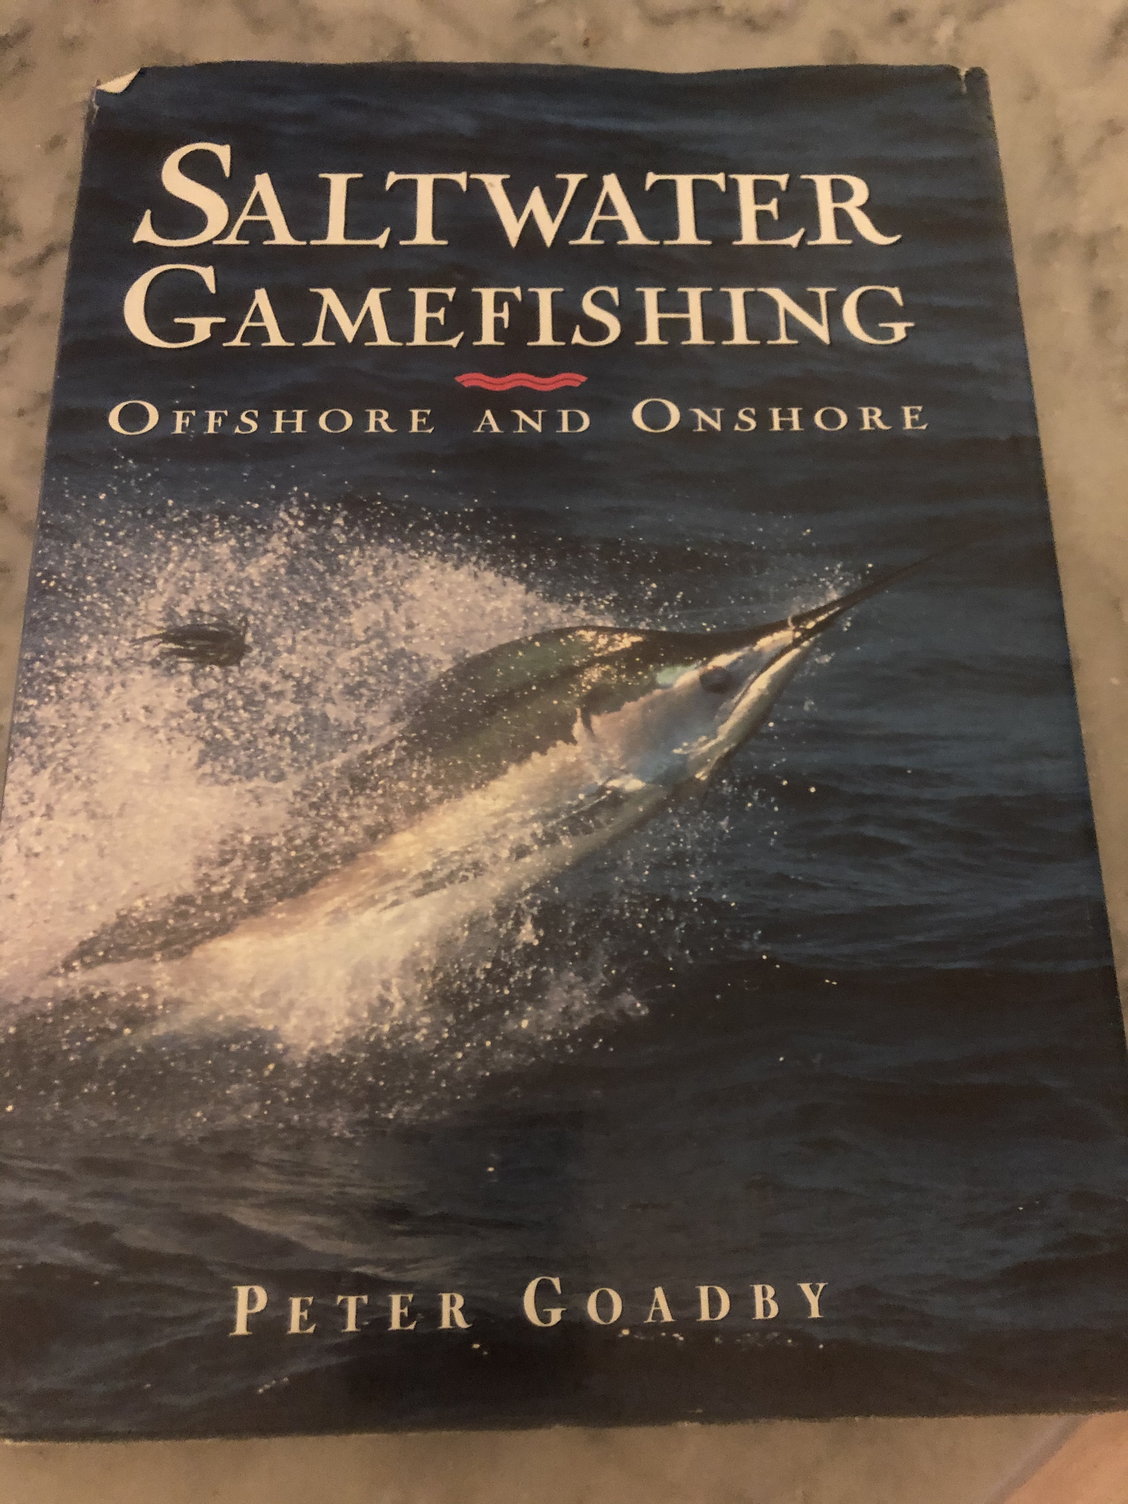 Good Books on Offshore fishing - The Hull Truth - Boating and